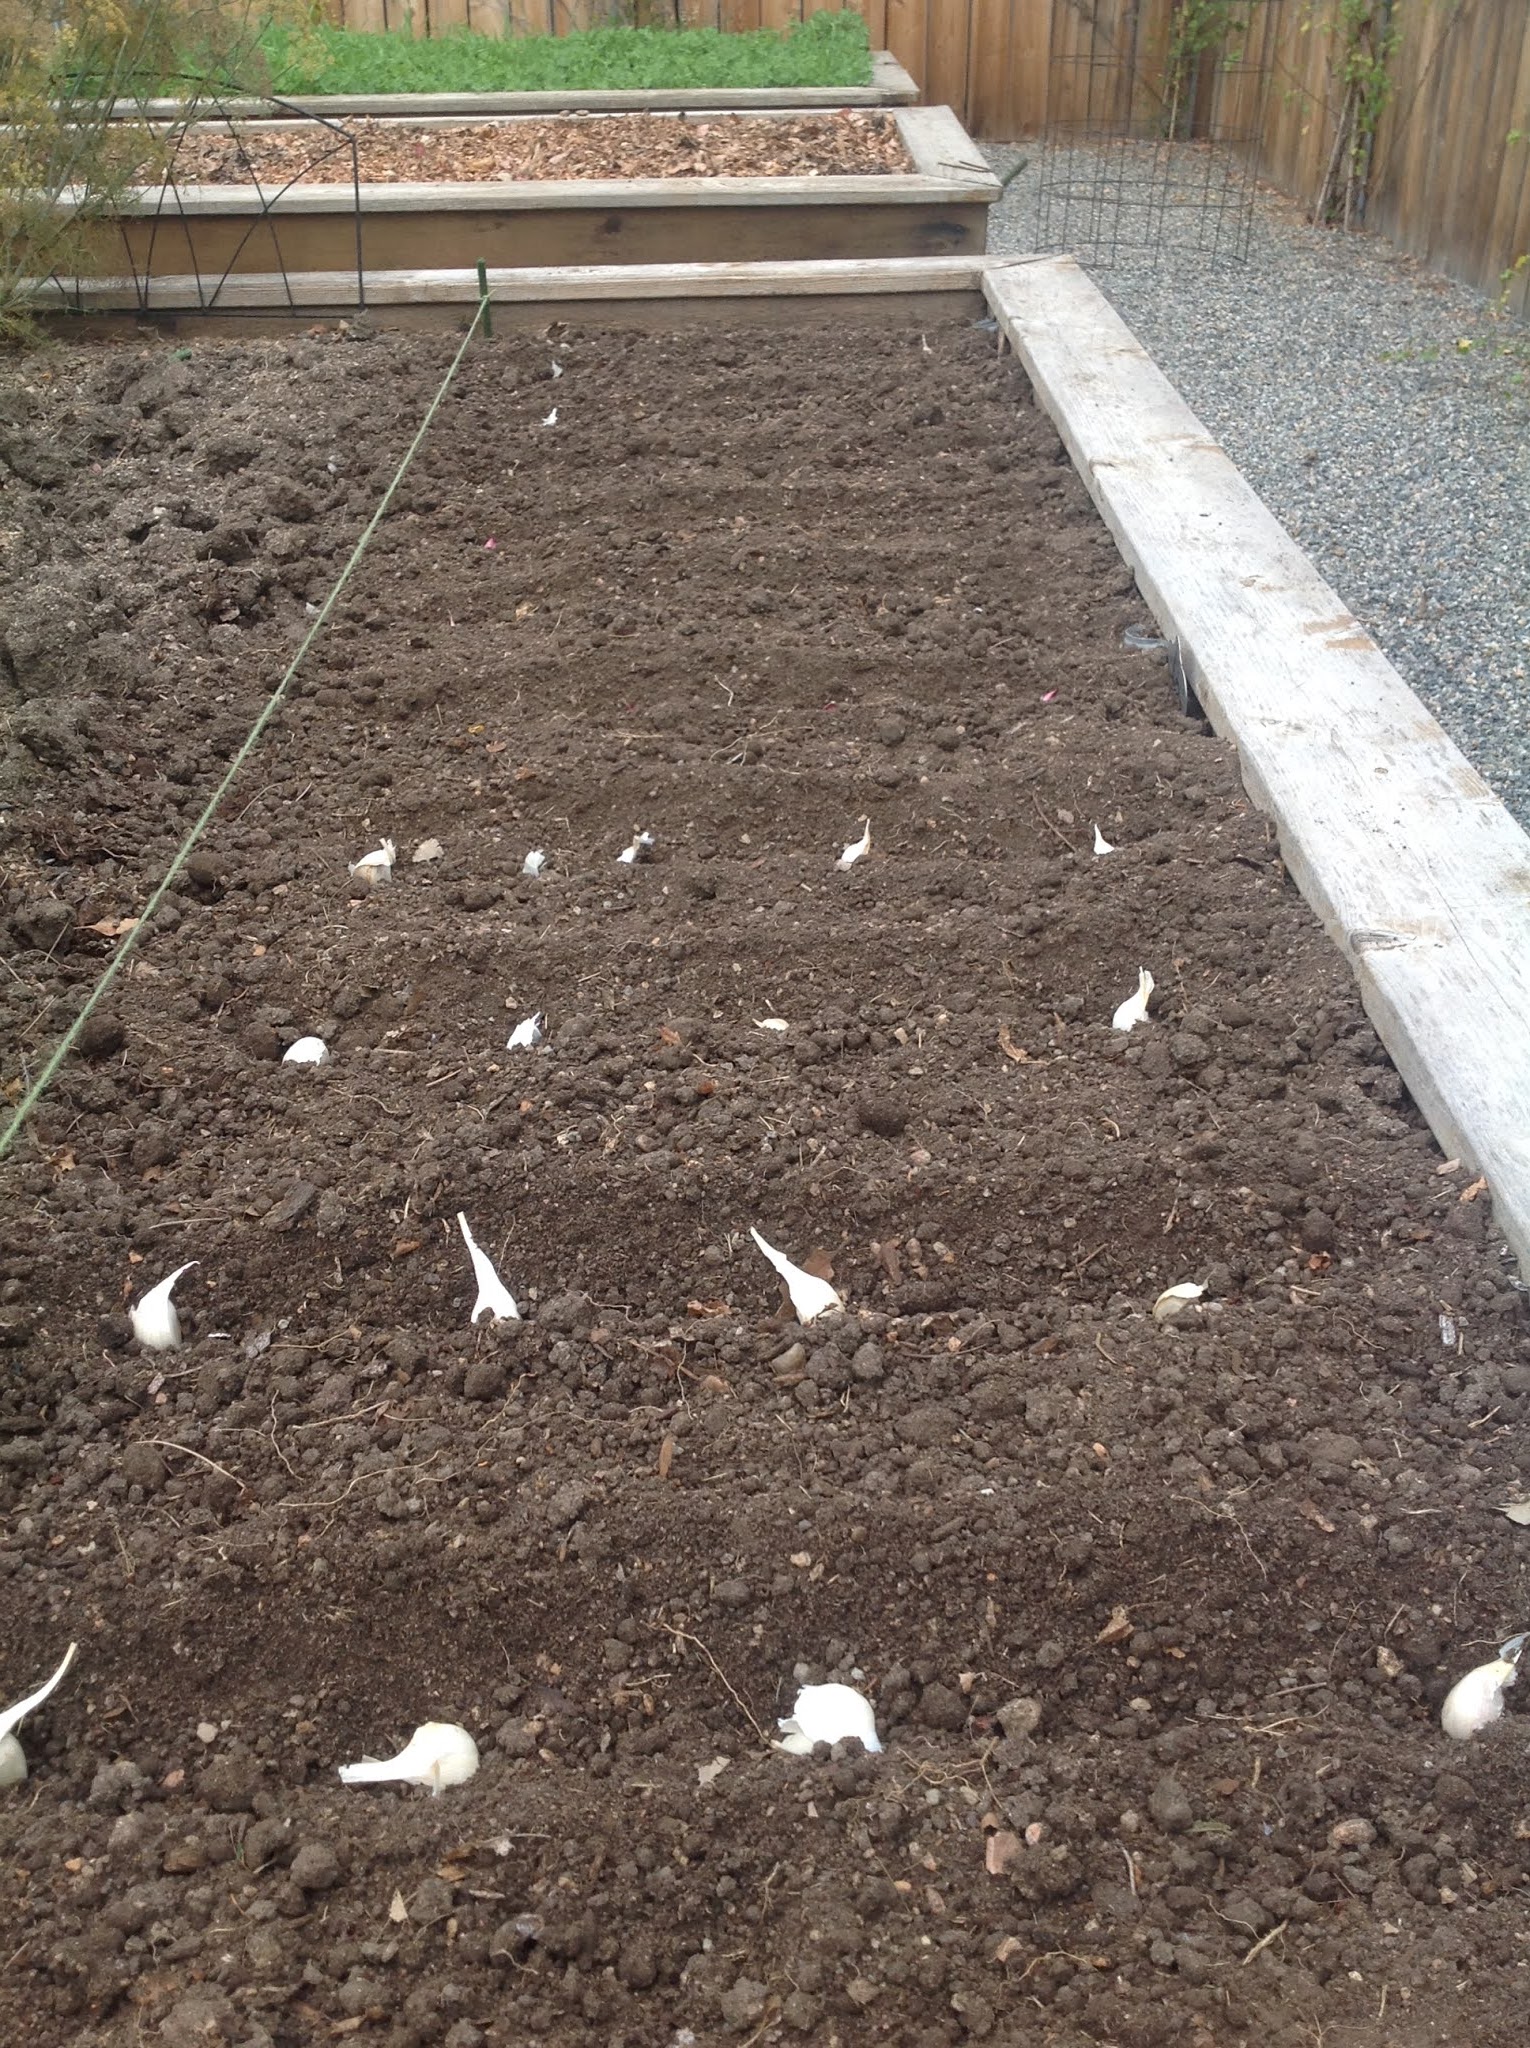 Master Gardeners—“It's Garlic Planting Time”, Roots